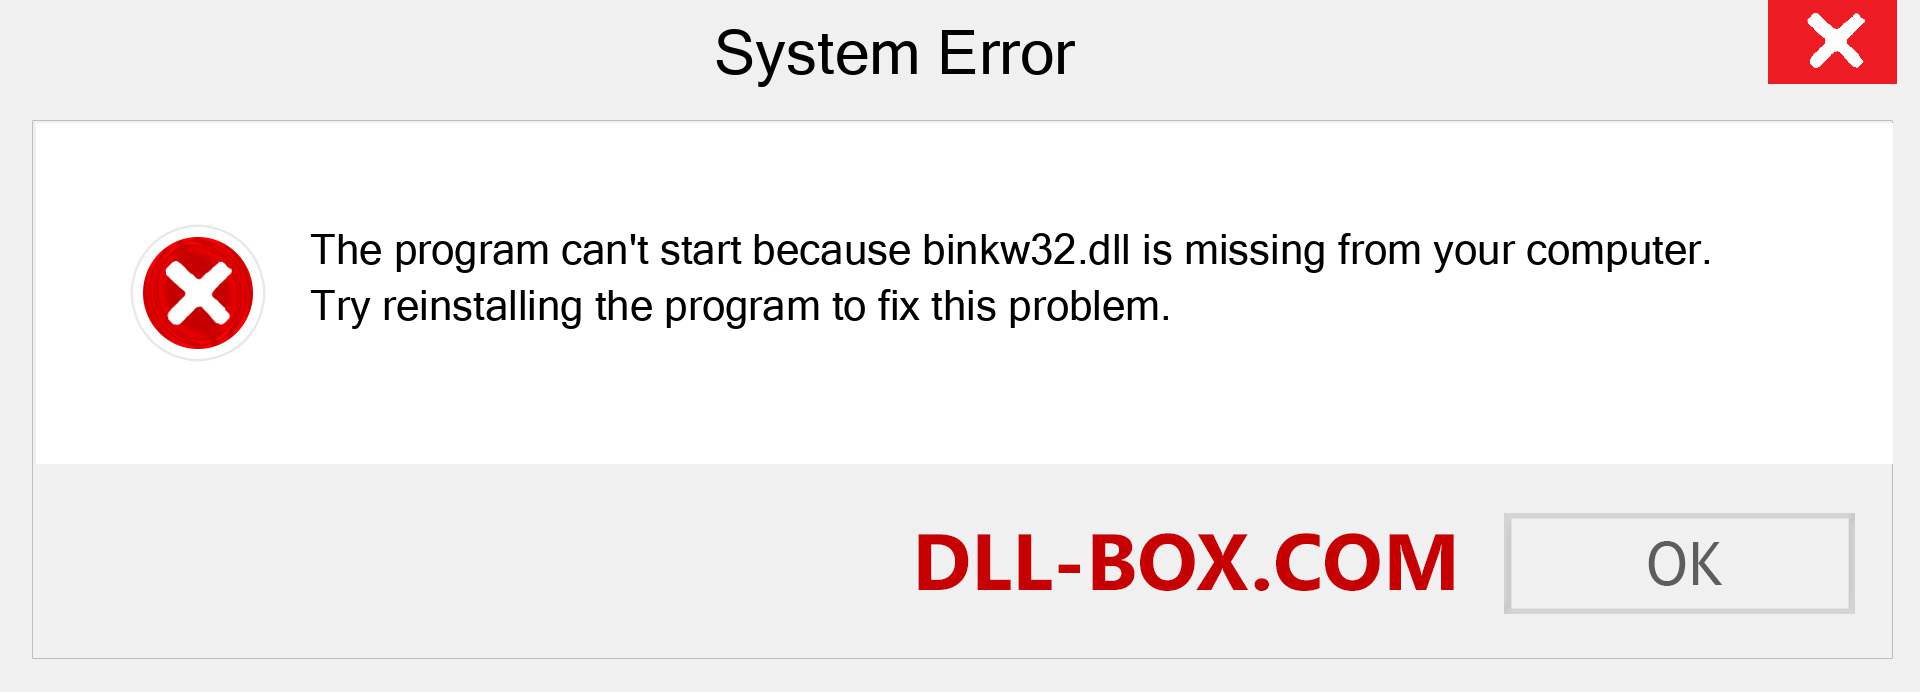  binkw32.dll file is missing?. Download for Windows 7, 8, 10 - Fix  binkw32 dll Missing Error on Windows, photos, images